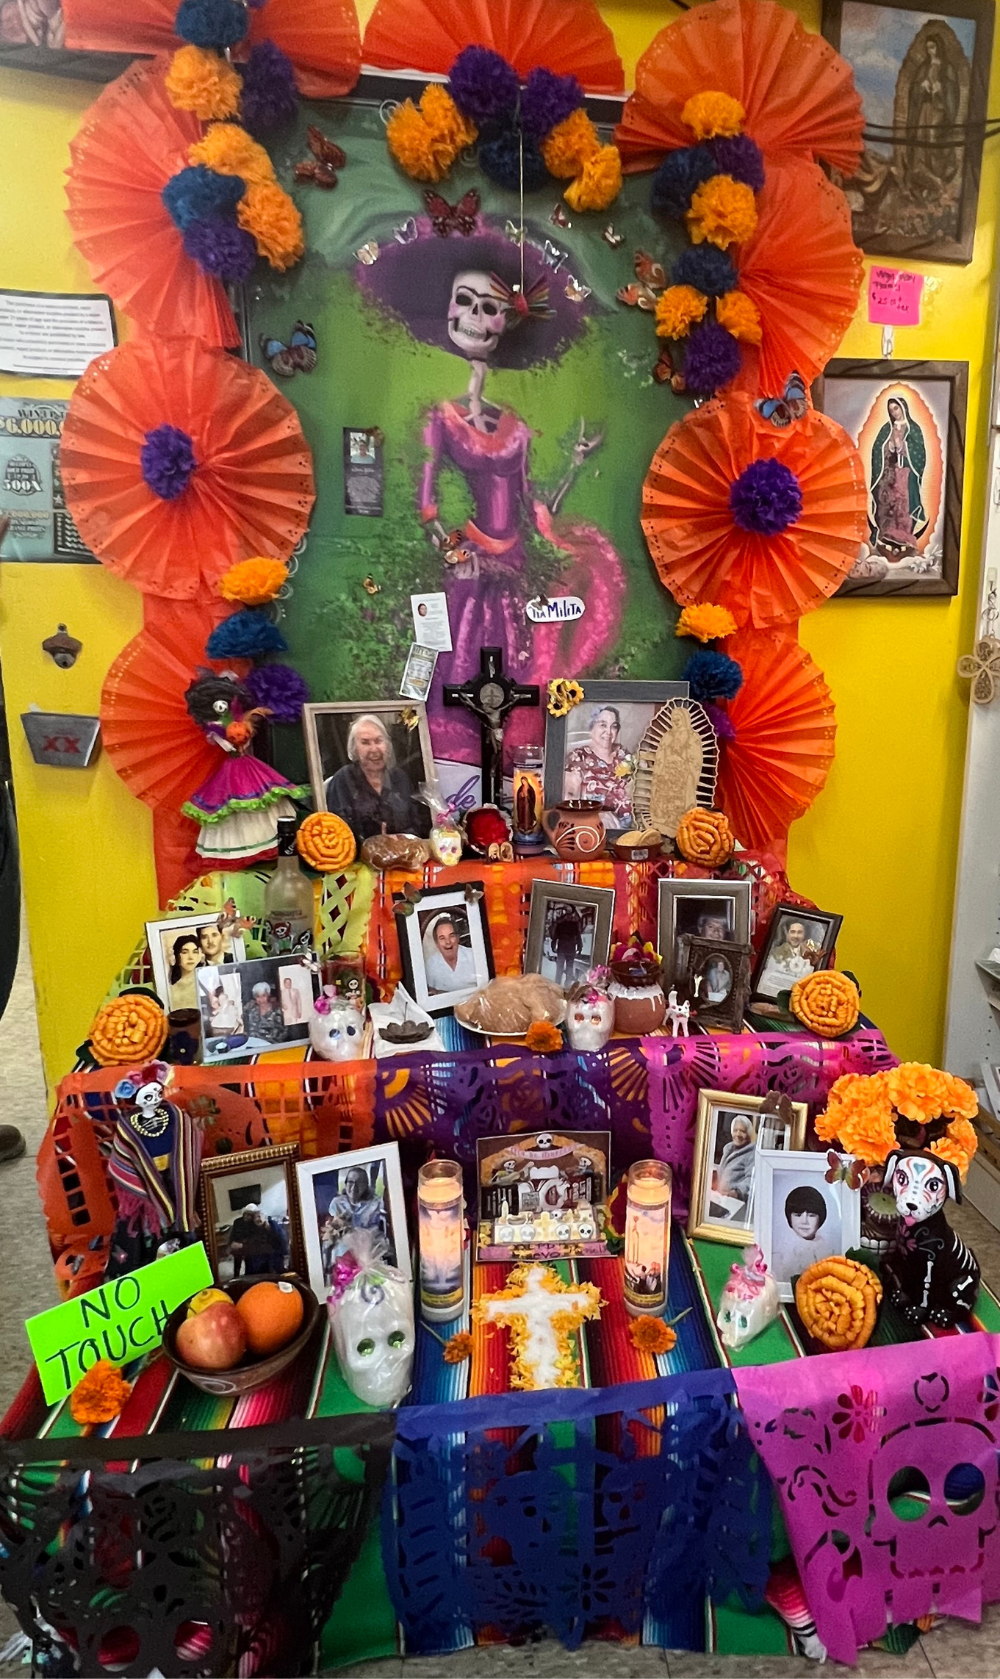 A display of ofrenda at El Popo Market. The display includes flowers. framed photos and candles